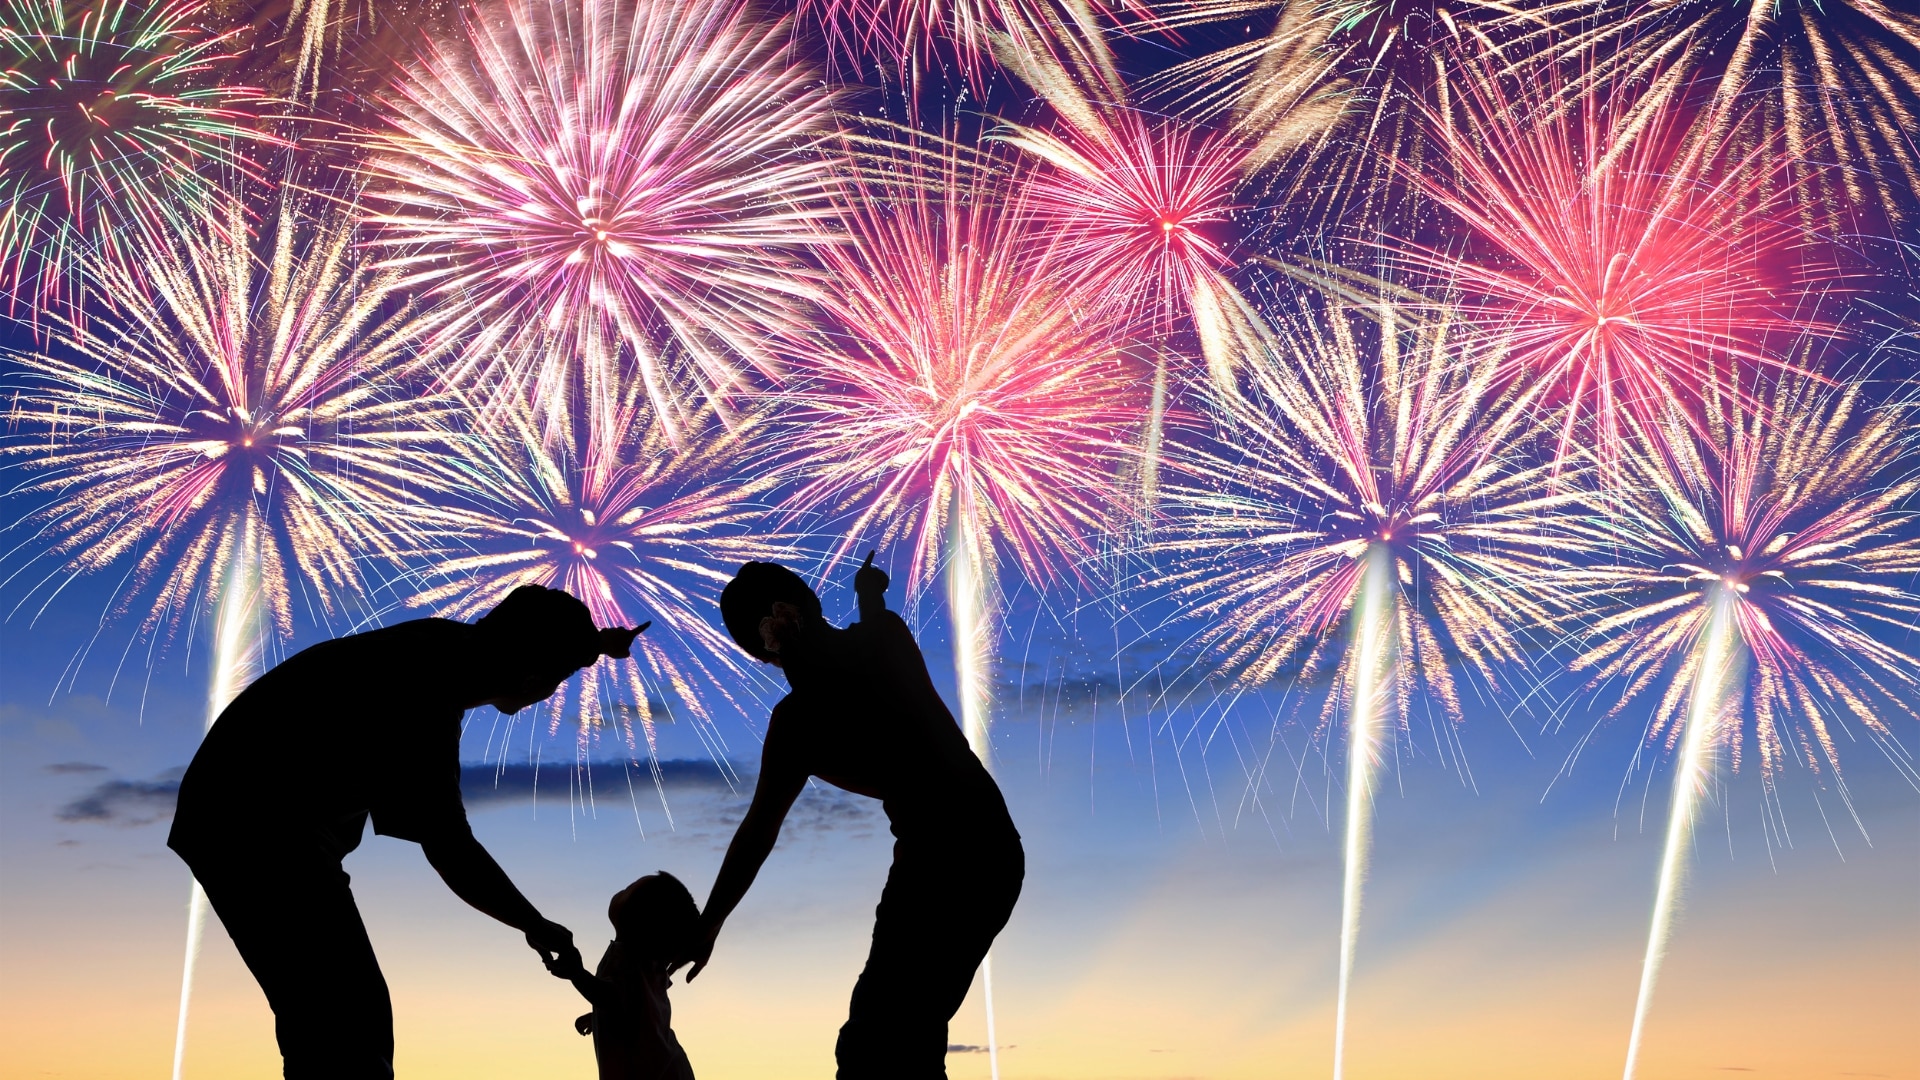 Managing Babies And Fireworks: Sleep, Events & Celebrations